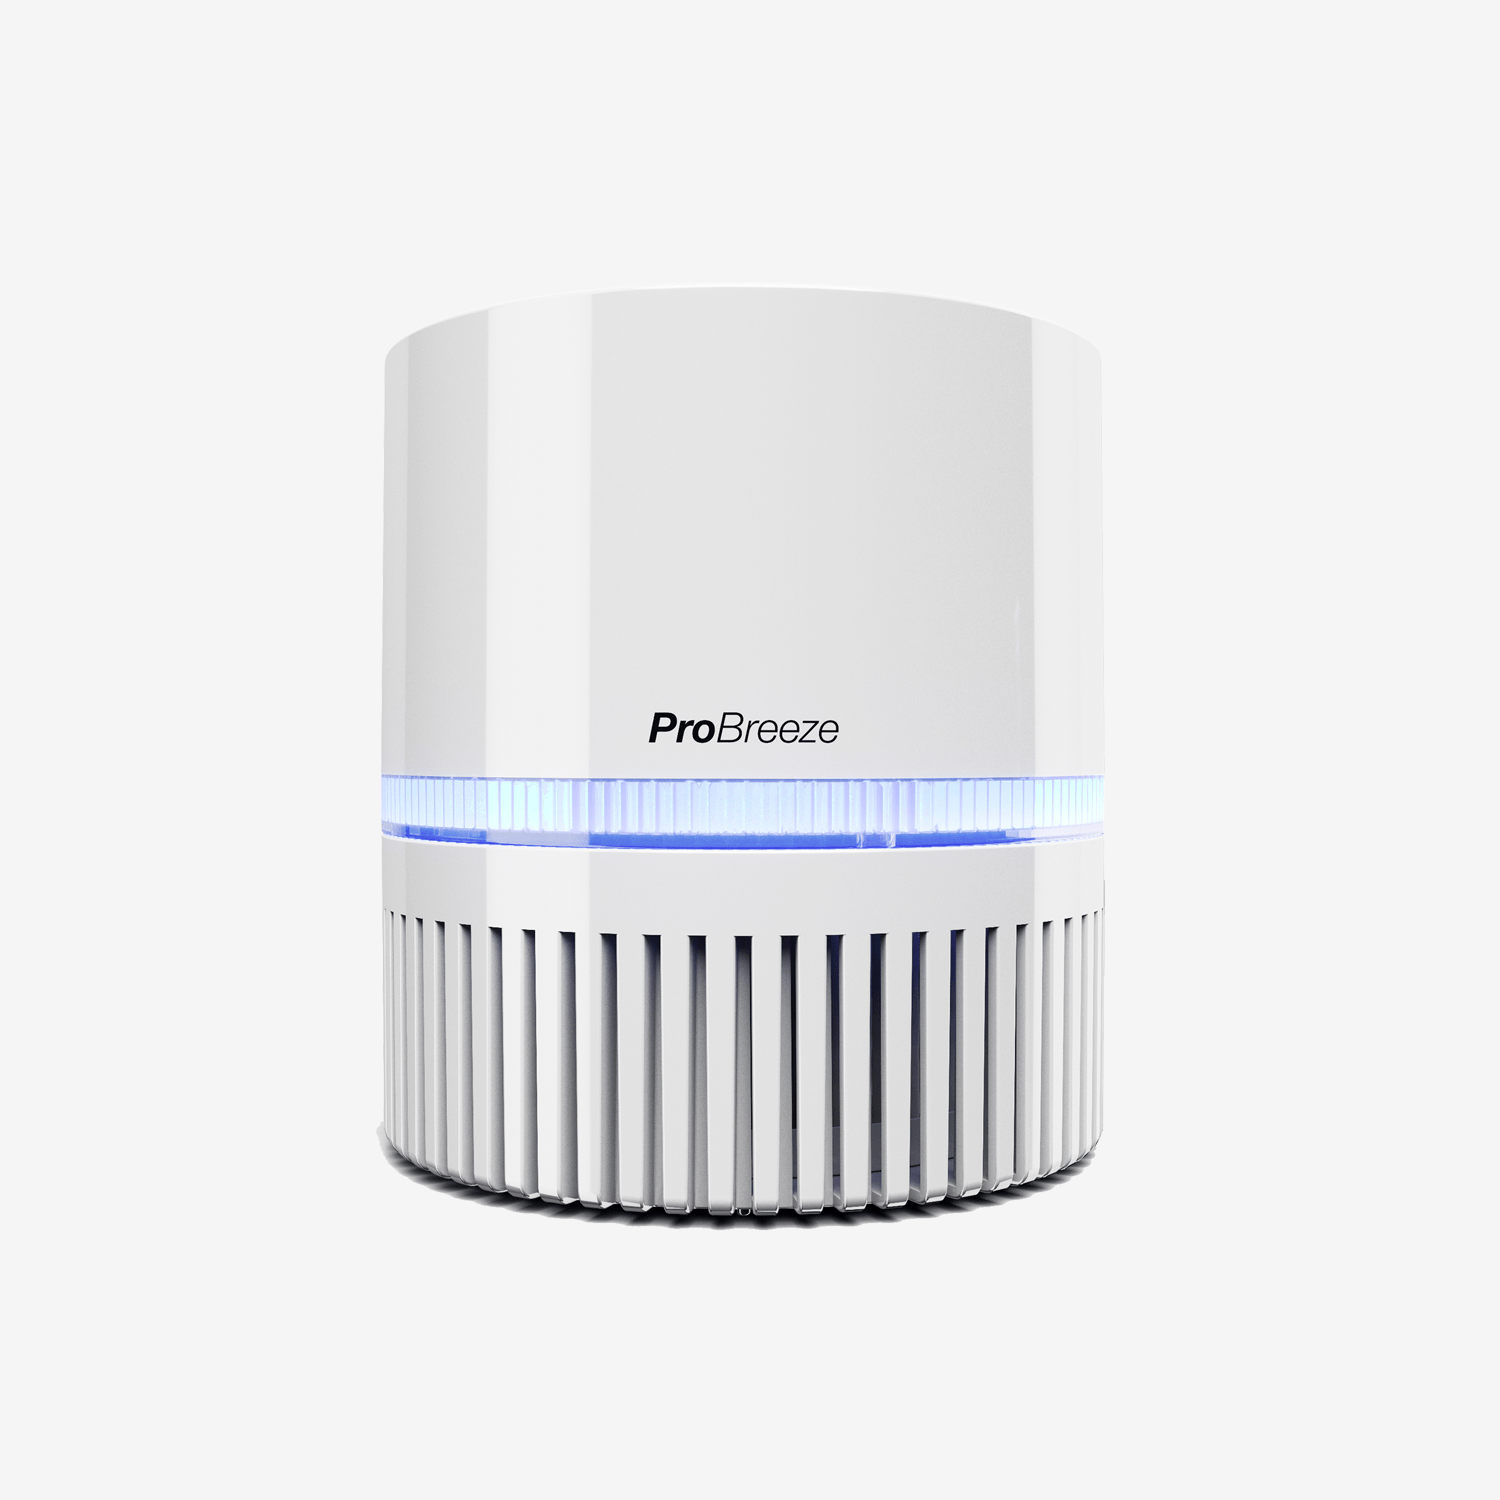 3-in-1 Mini Air Purifier with True HEPA Filter, Negative Ioniser and USB Adaptor